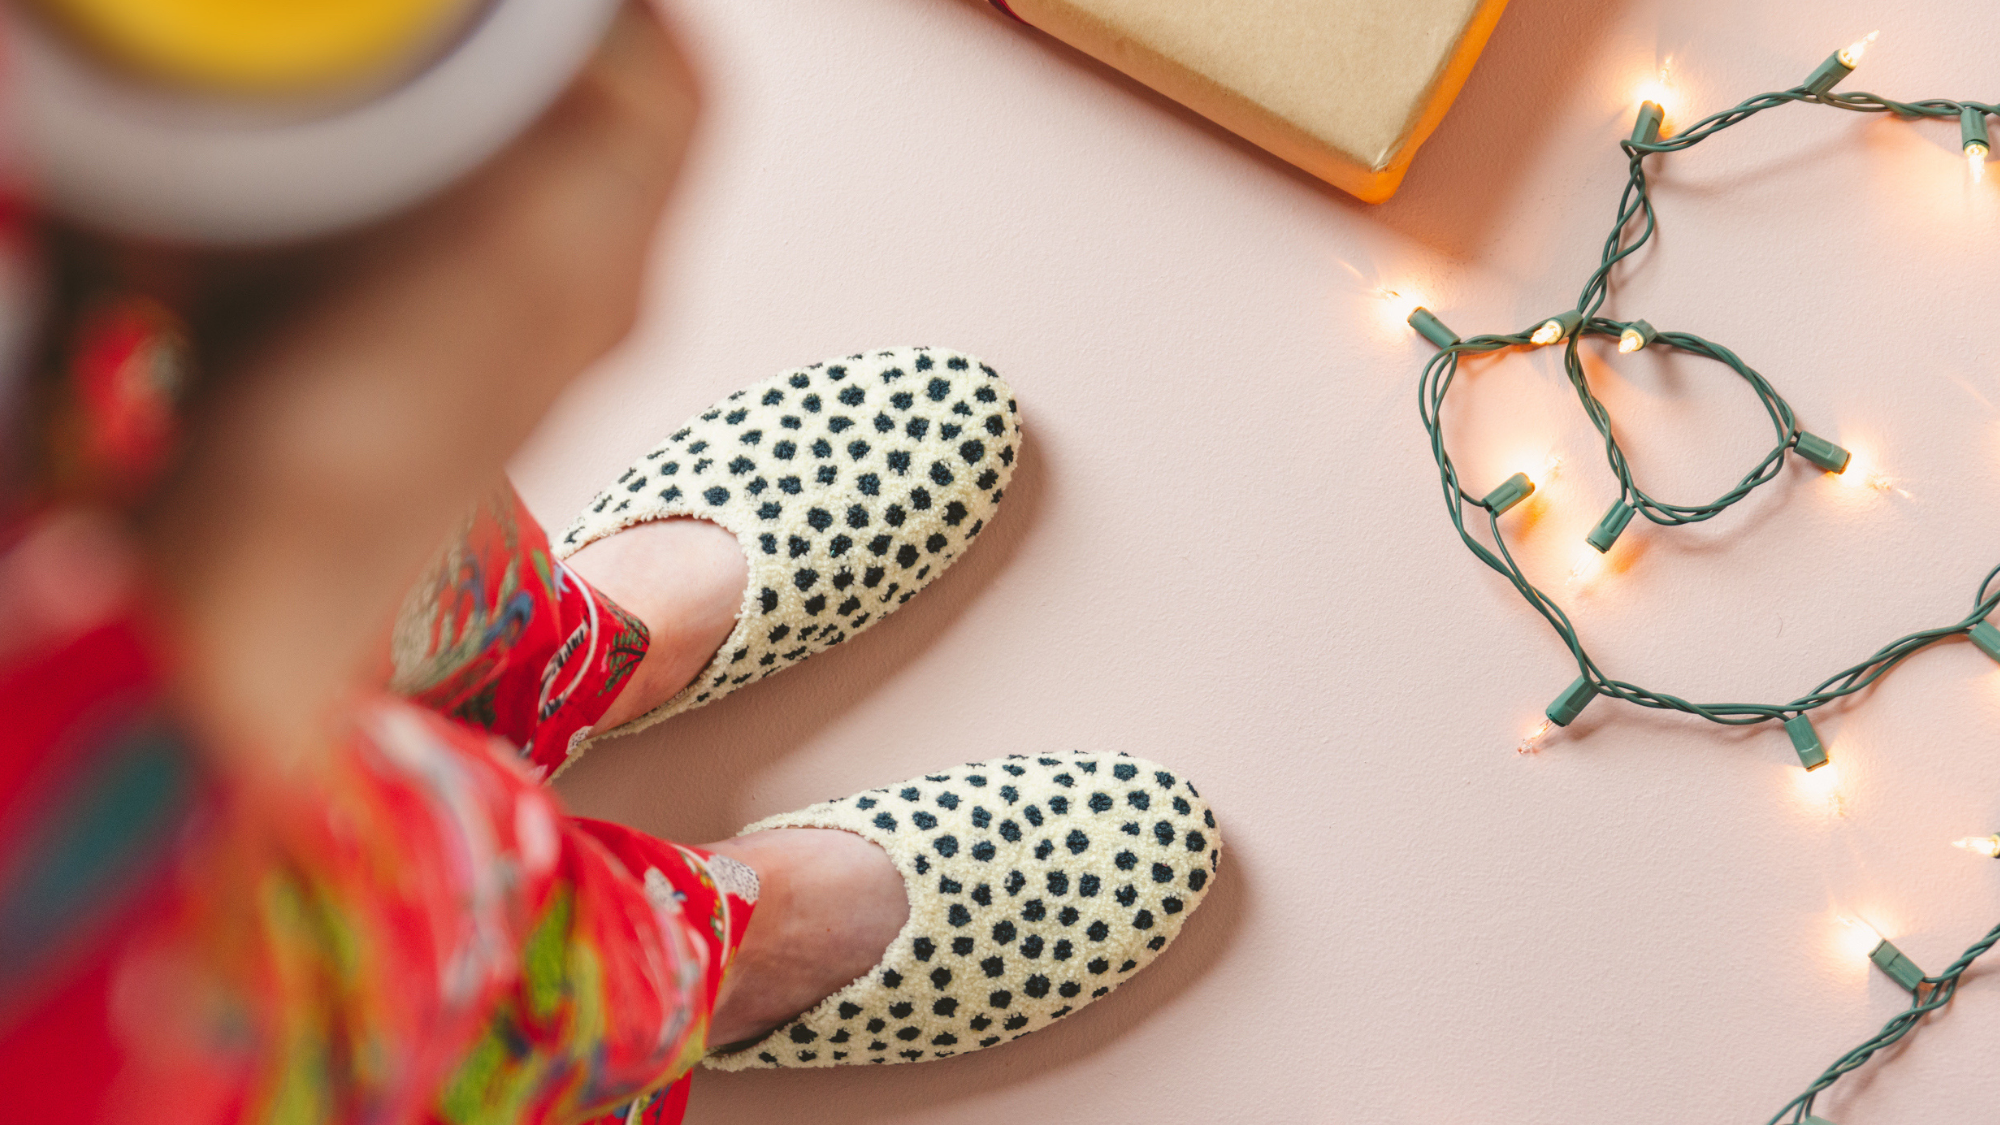 Introducing Printfresh Slippers: Self-Care for Your Feet